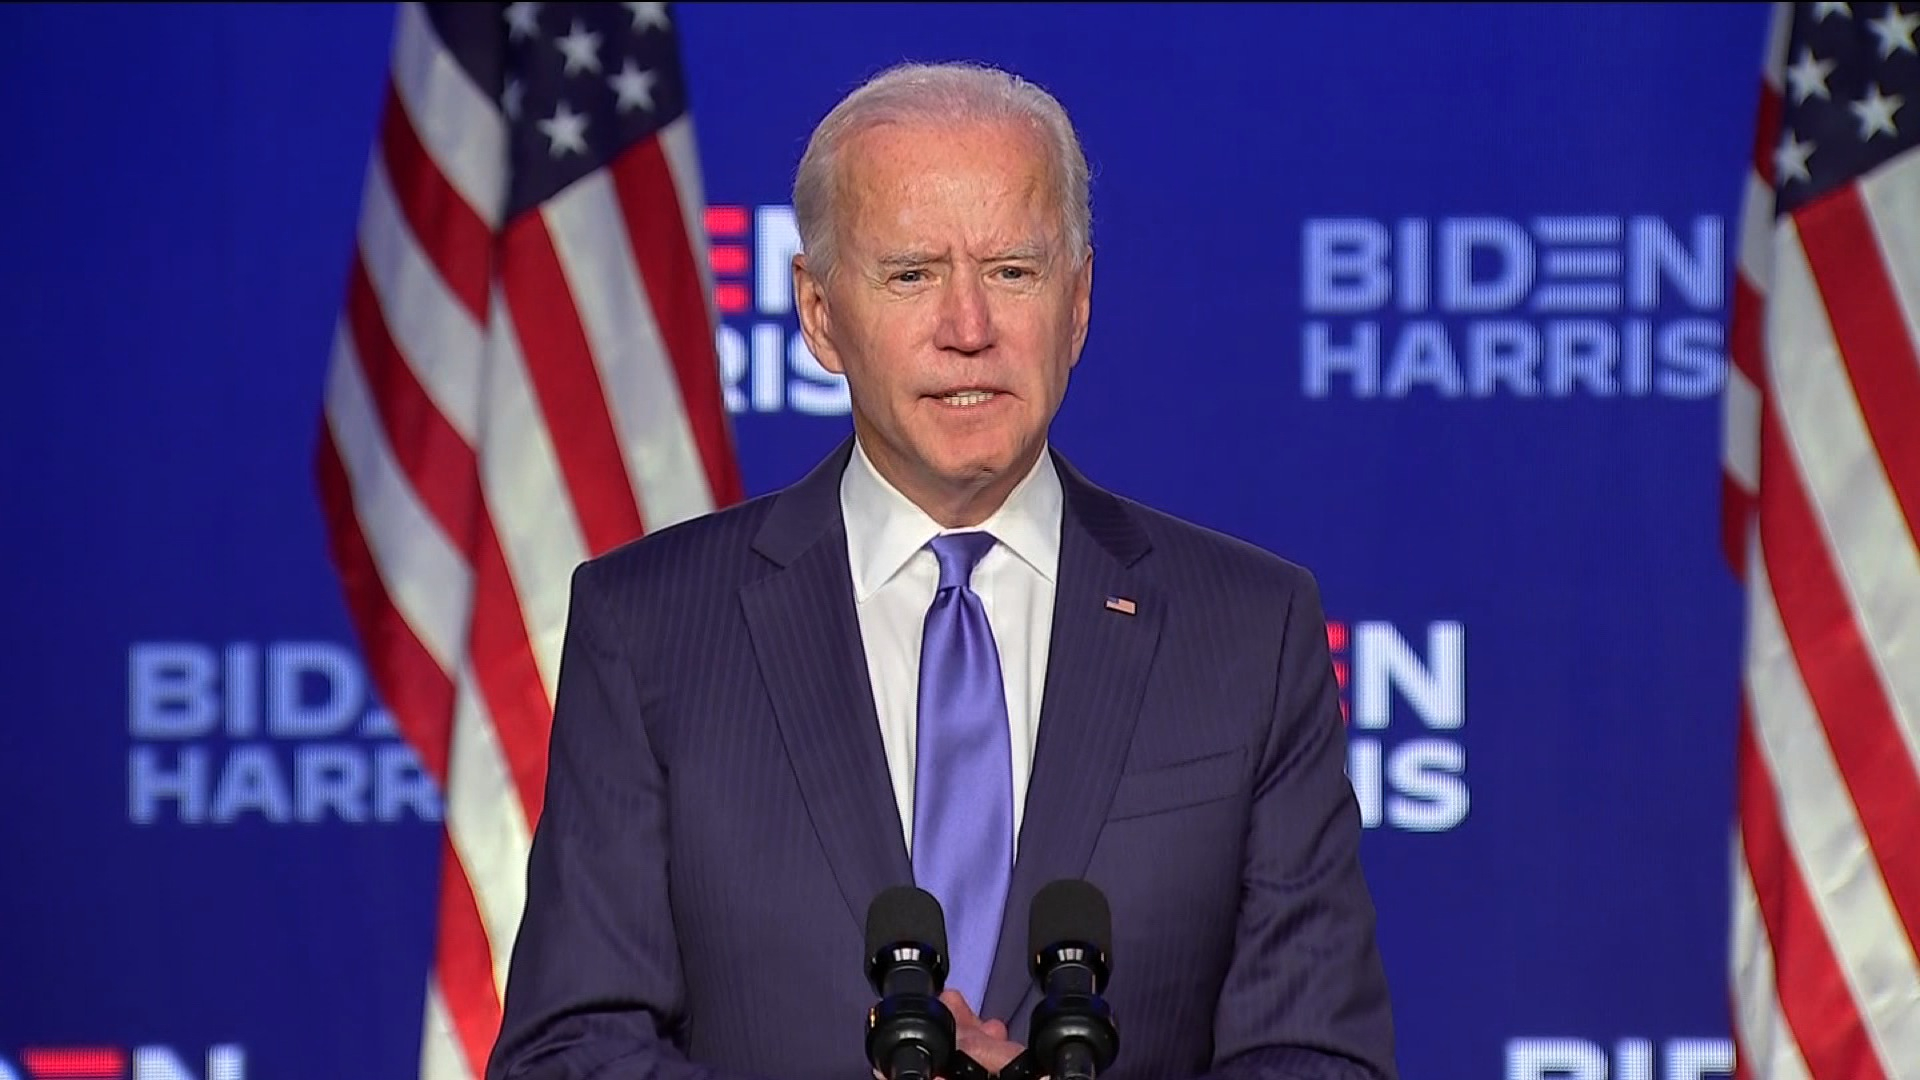 Biden will assume the Presidency of the United States on January 20 at the age of 78, which will make him the oldest person to enter the Oval Office